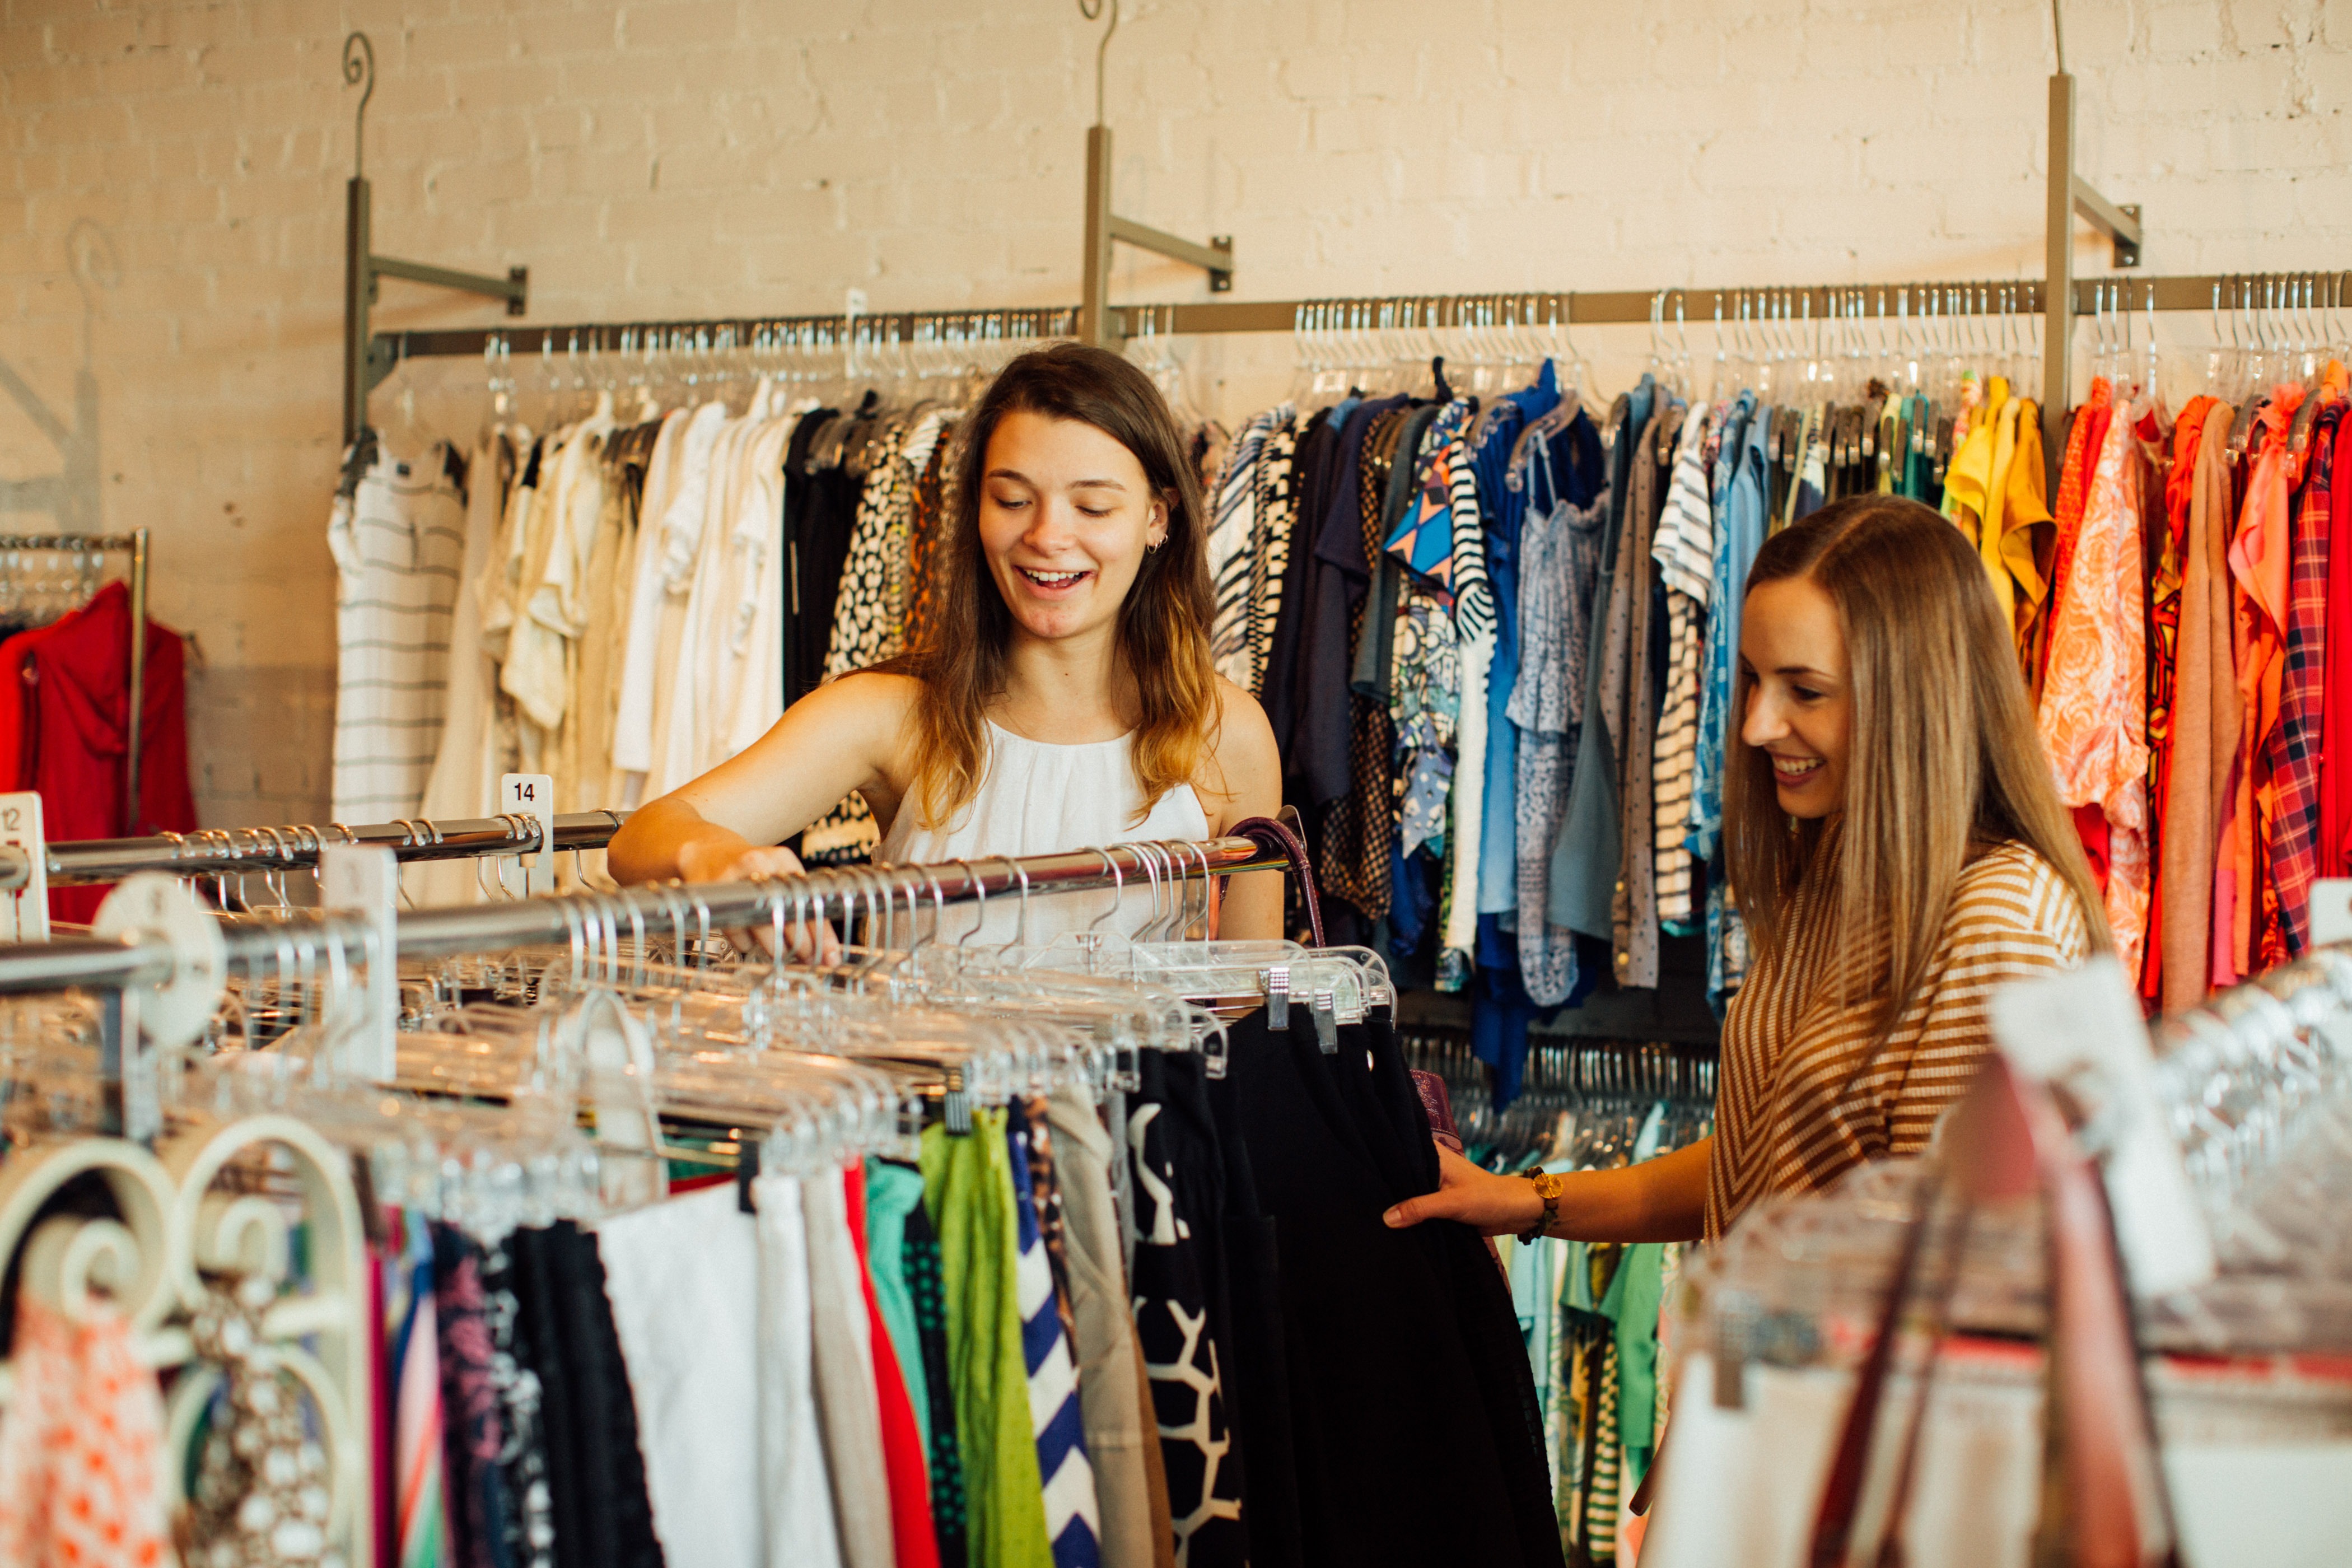 6 Tips for Consignment Clothes Shopping Success  |  Fairly Southern  |  Fifi's Consignment in Raleigh, NC